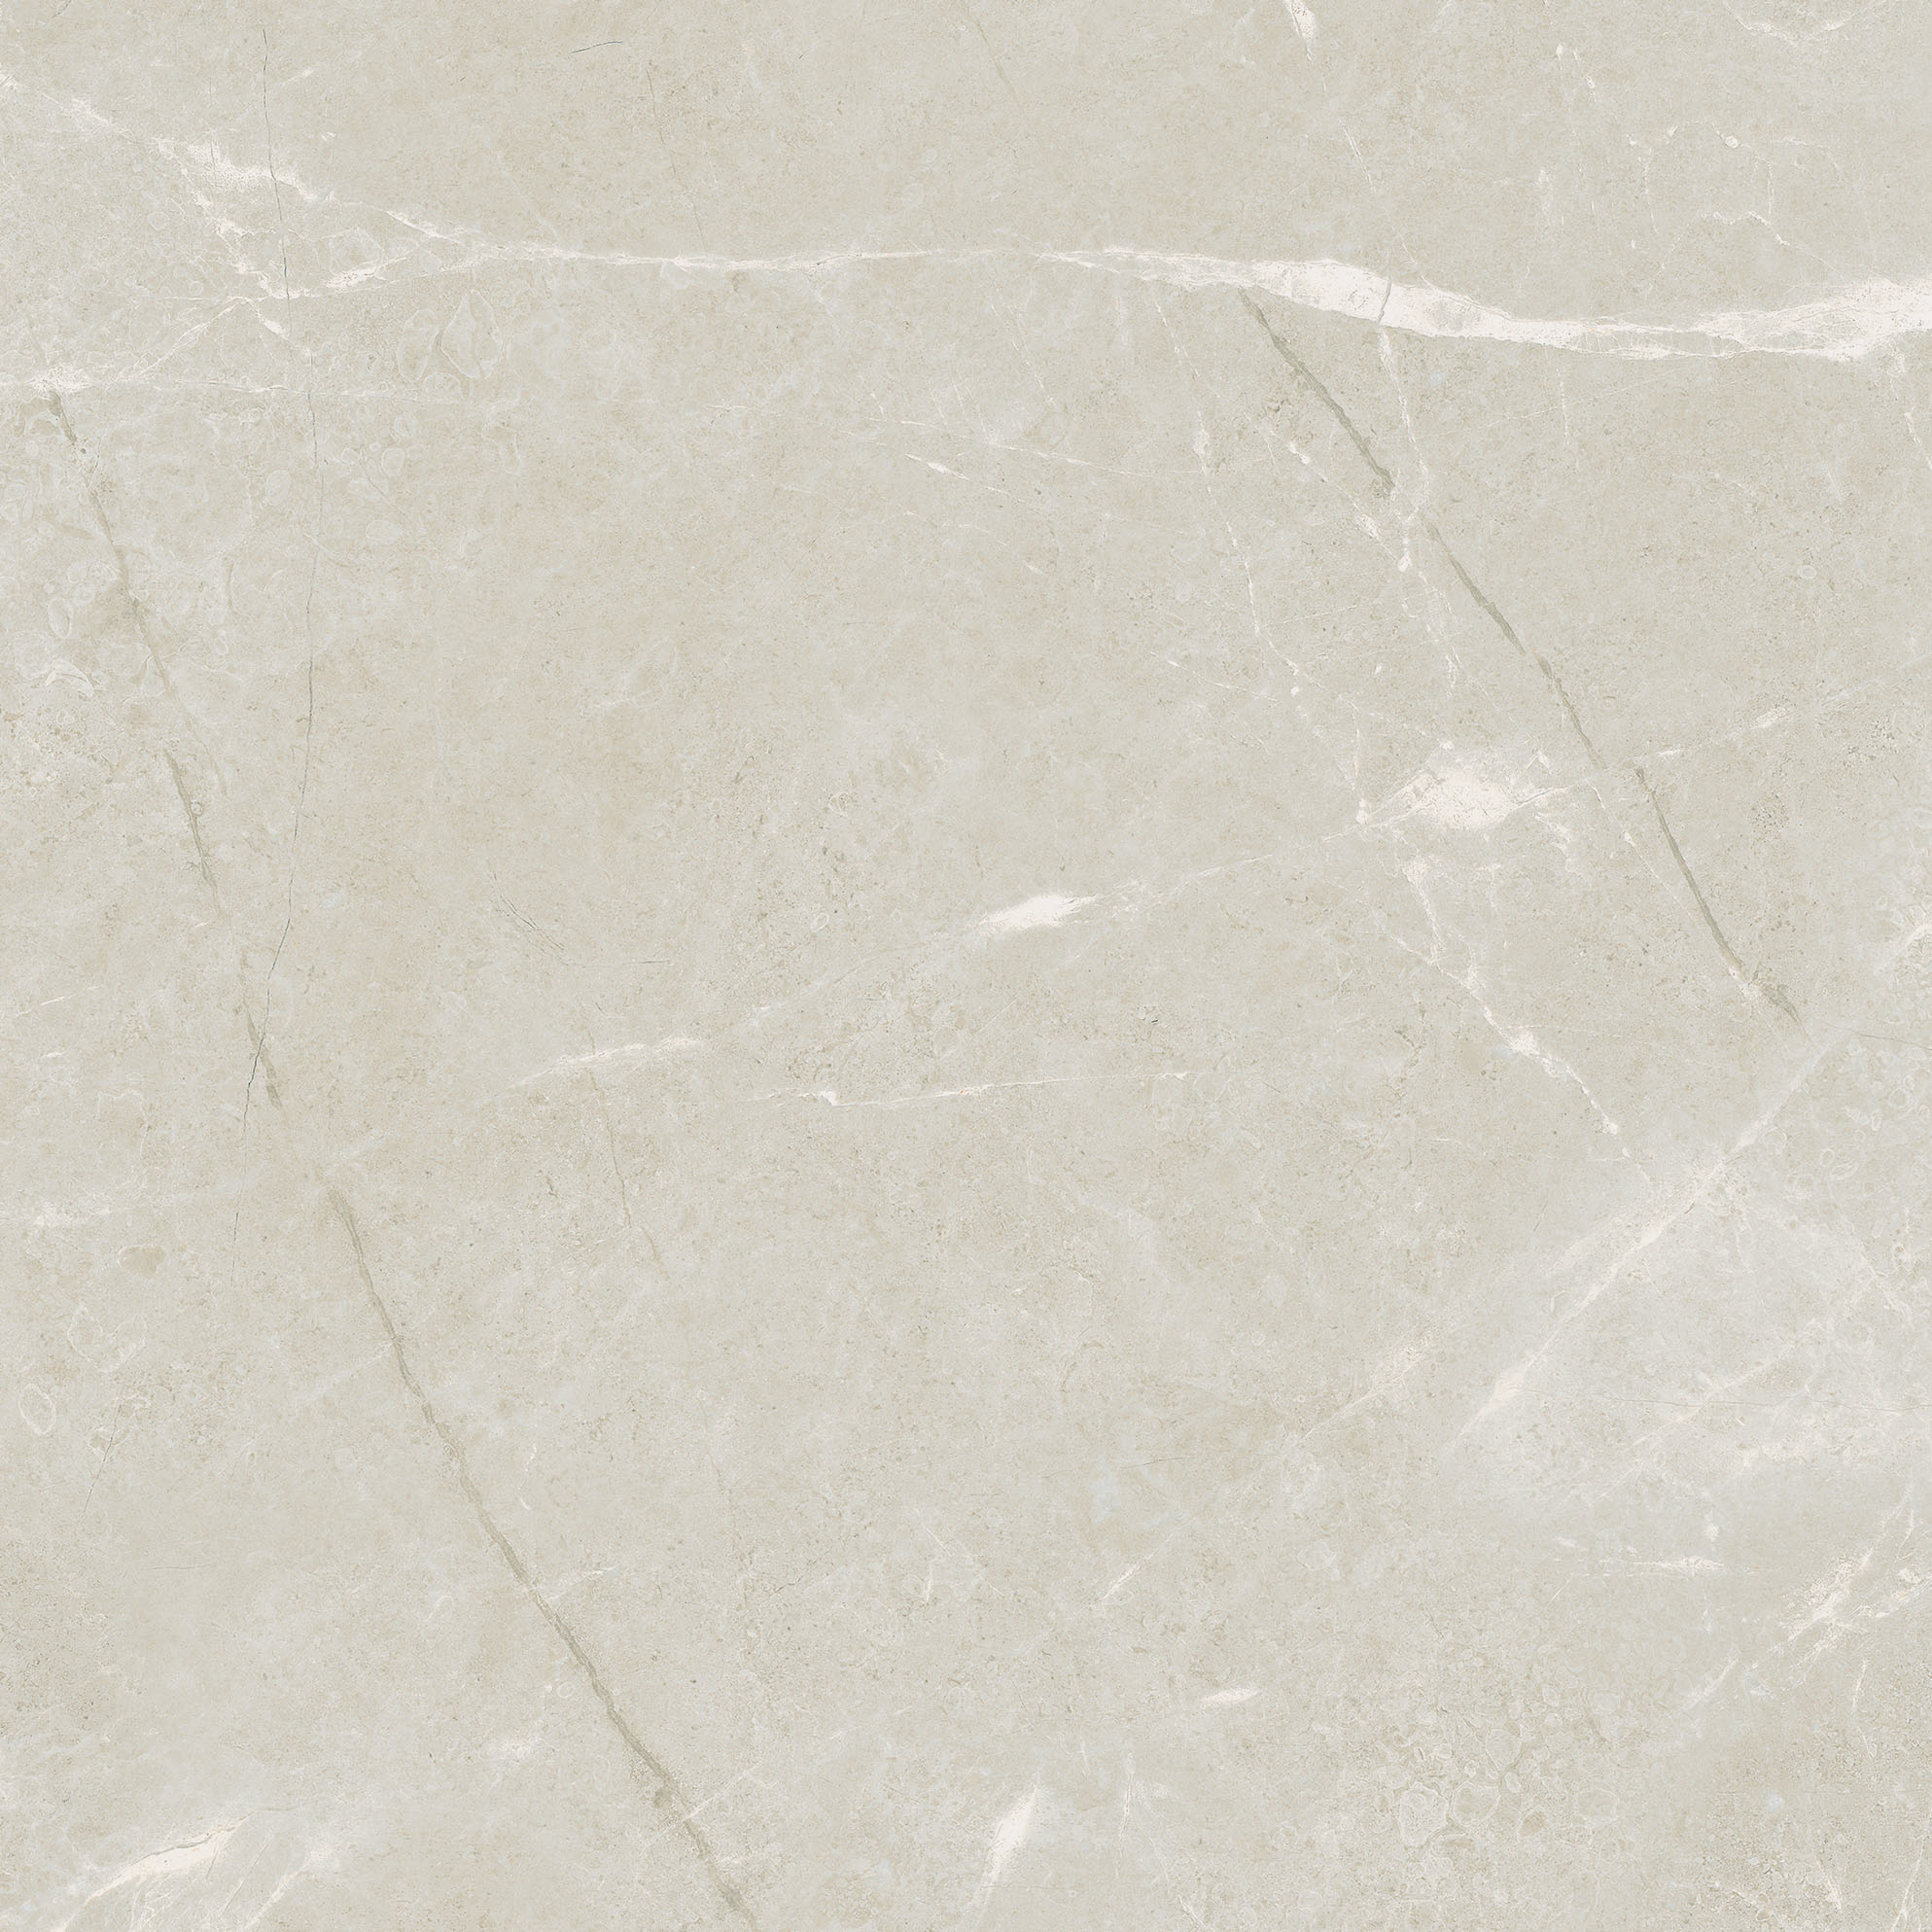 avorio pattern glazed porcelain field tile from torino anatolia collection distributed by surface group international matte finish pressed edge 20x20 square shape